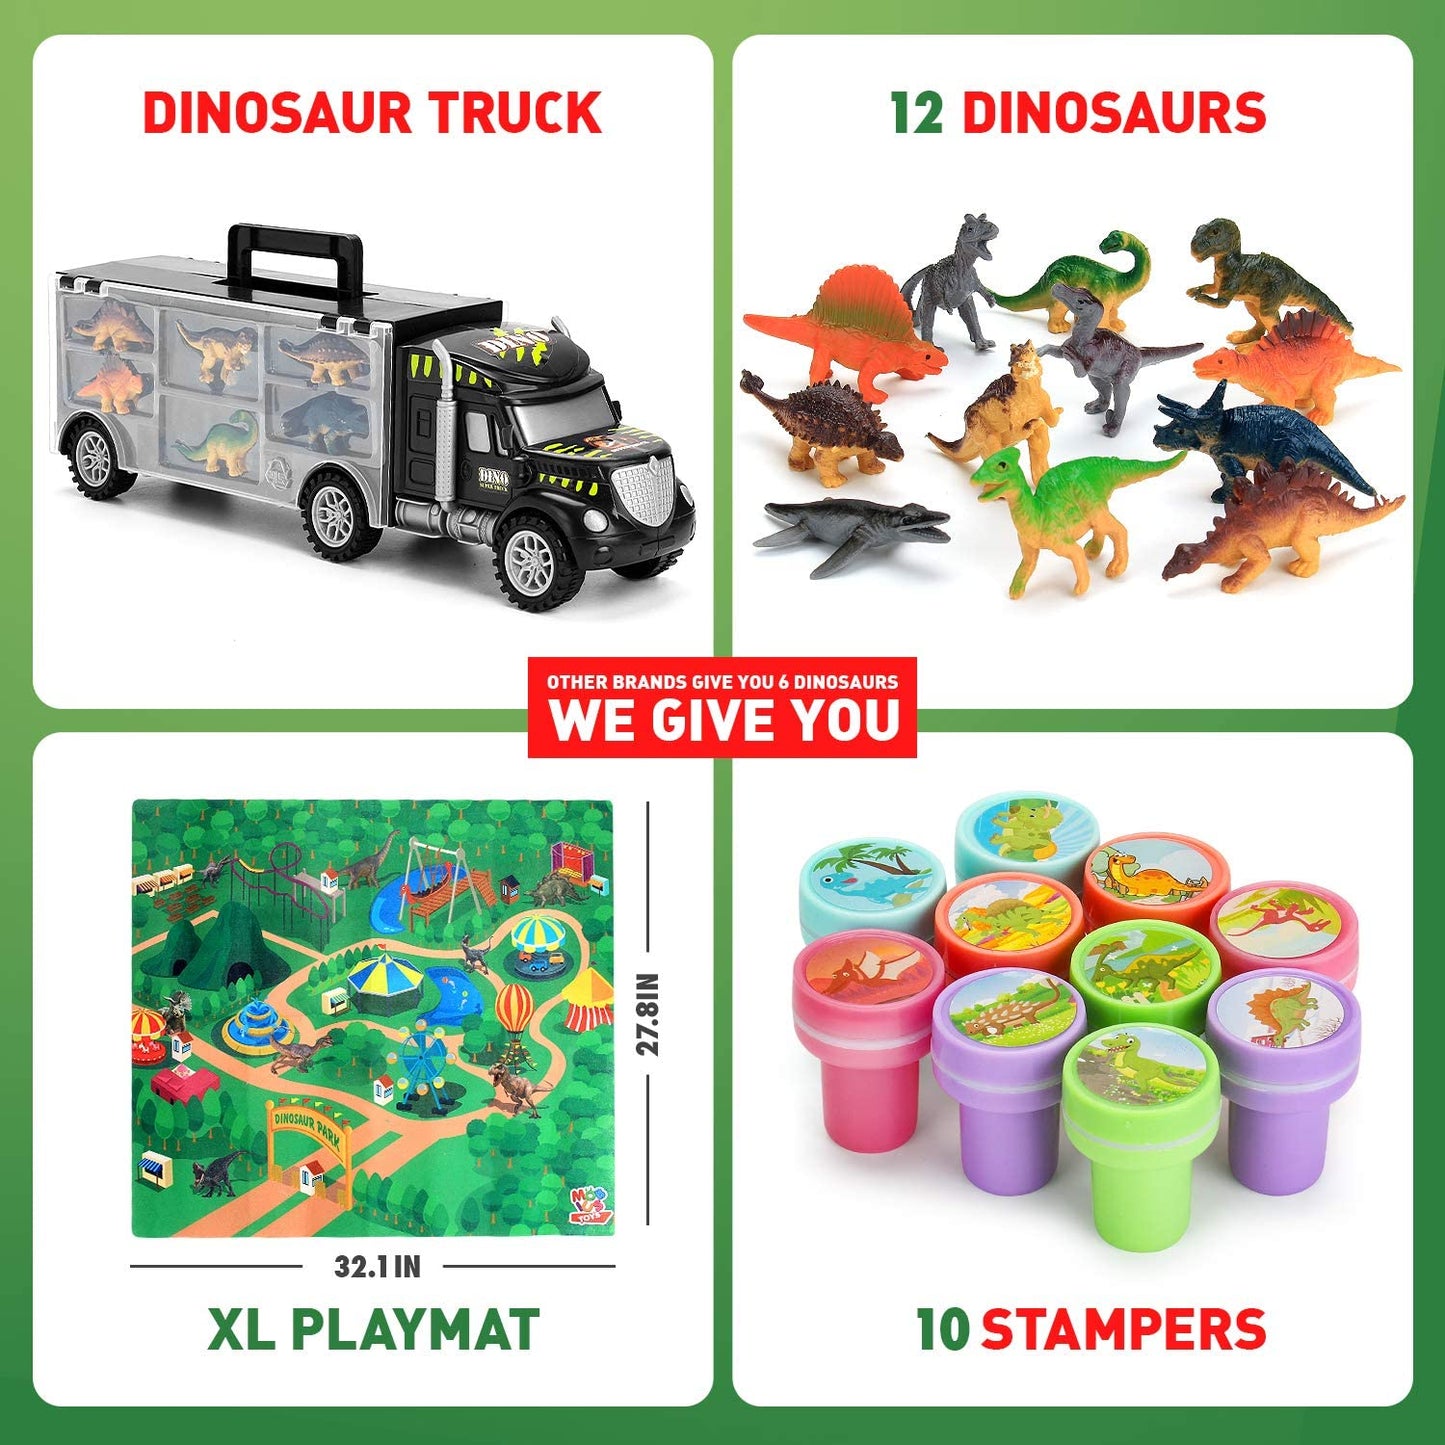 Dinosaurs Playset with 12 Toy Dinosaurs, Playmat and Accessories